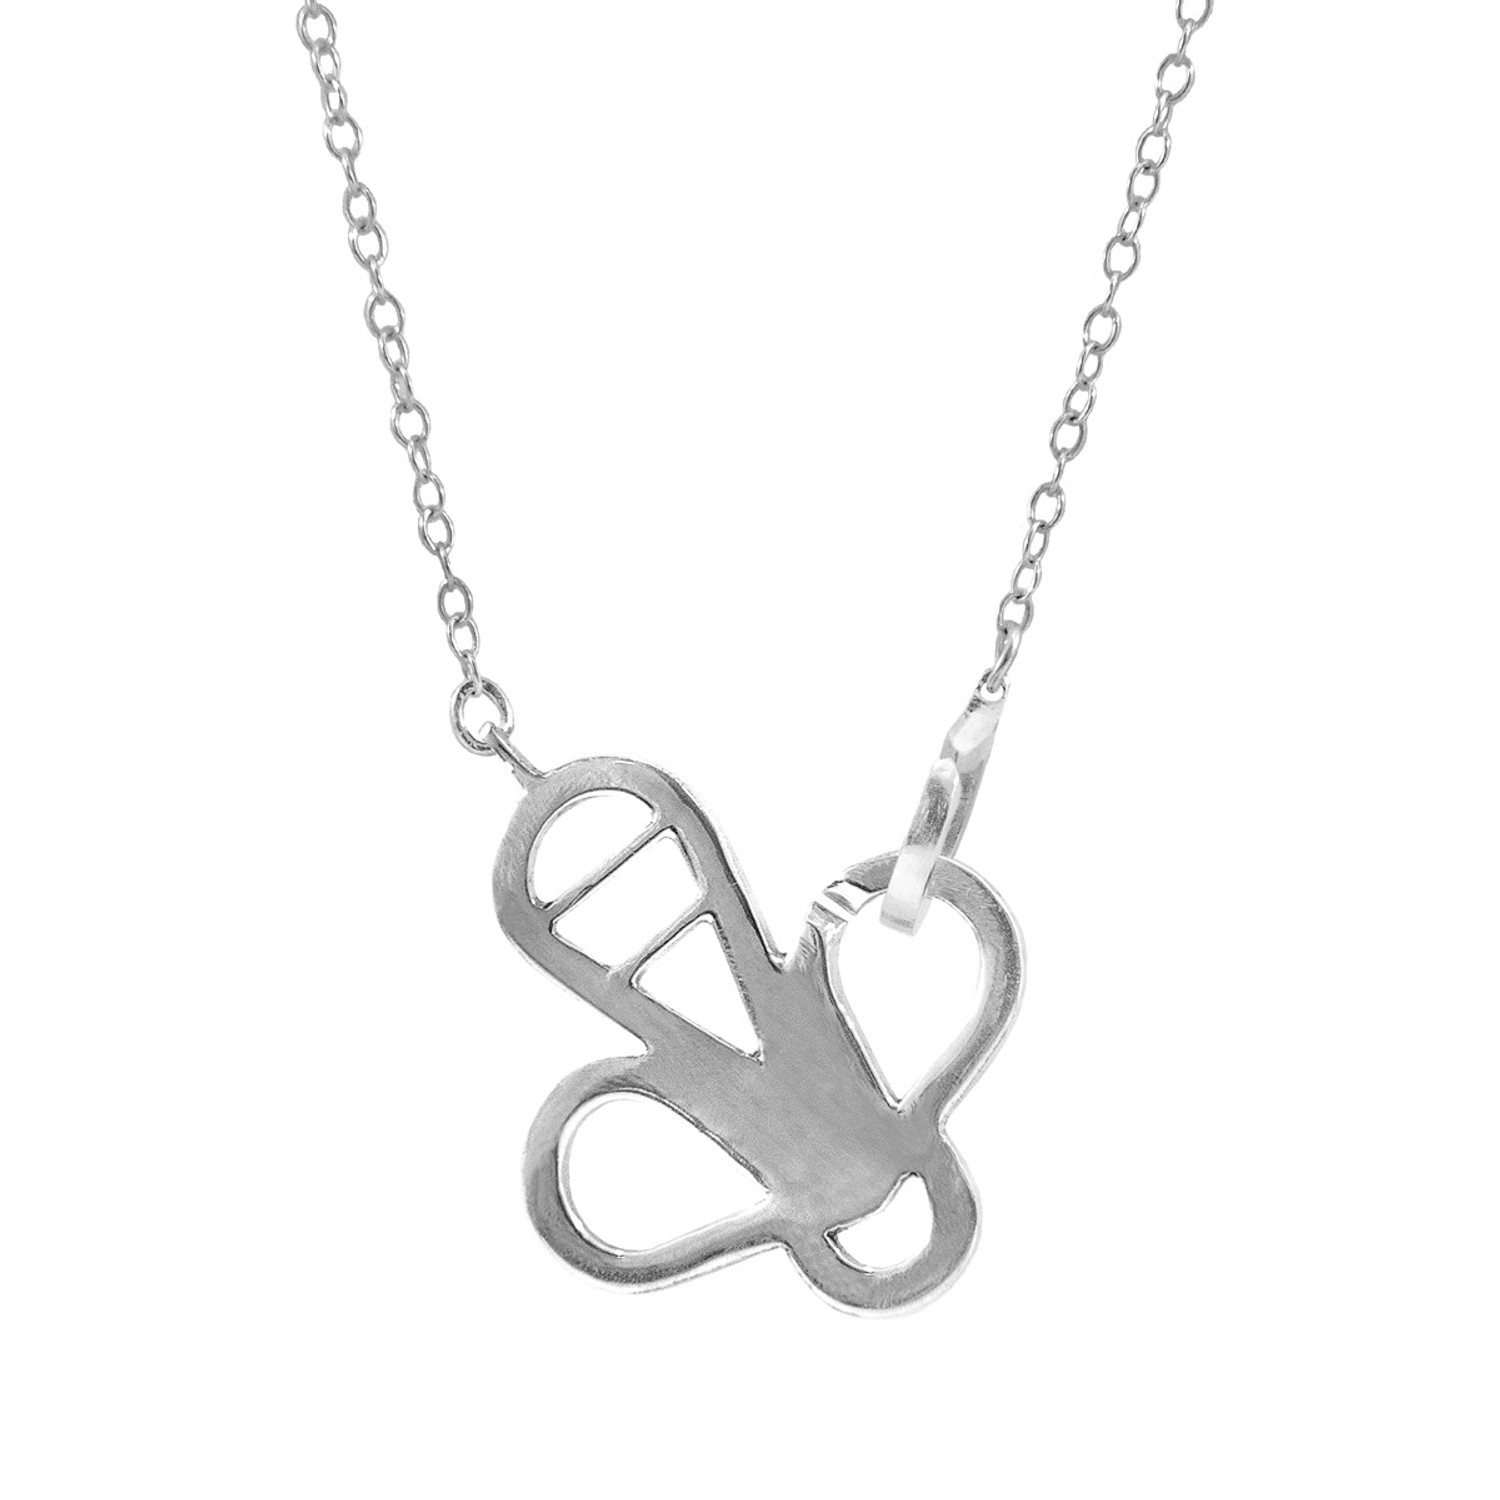 Anchor & Crew Flying Bee Link Paradise Silver Necklace Pendant